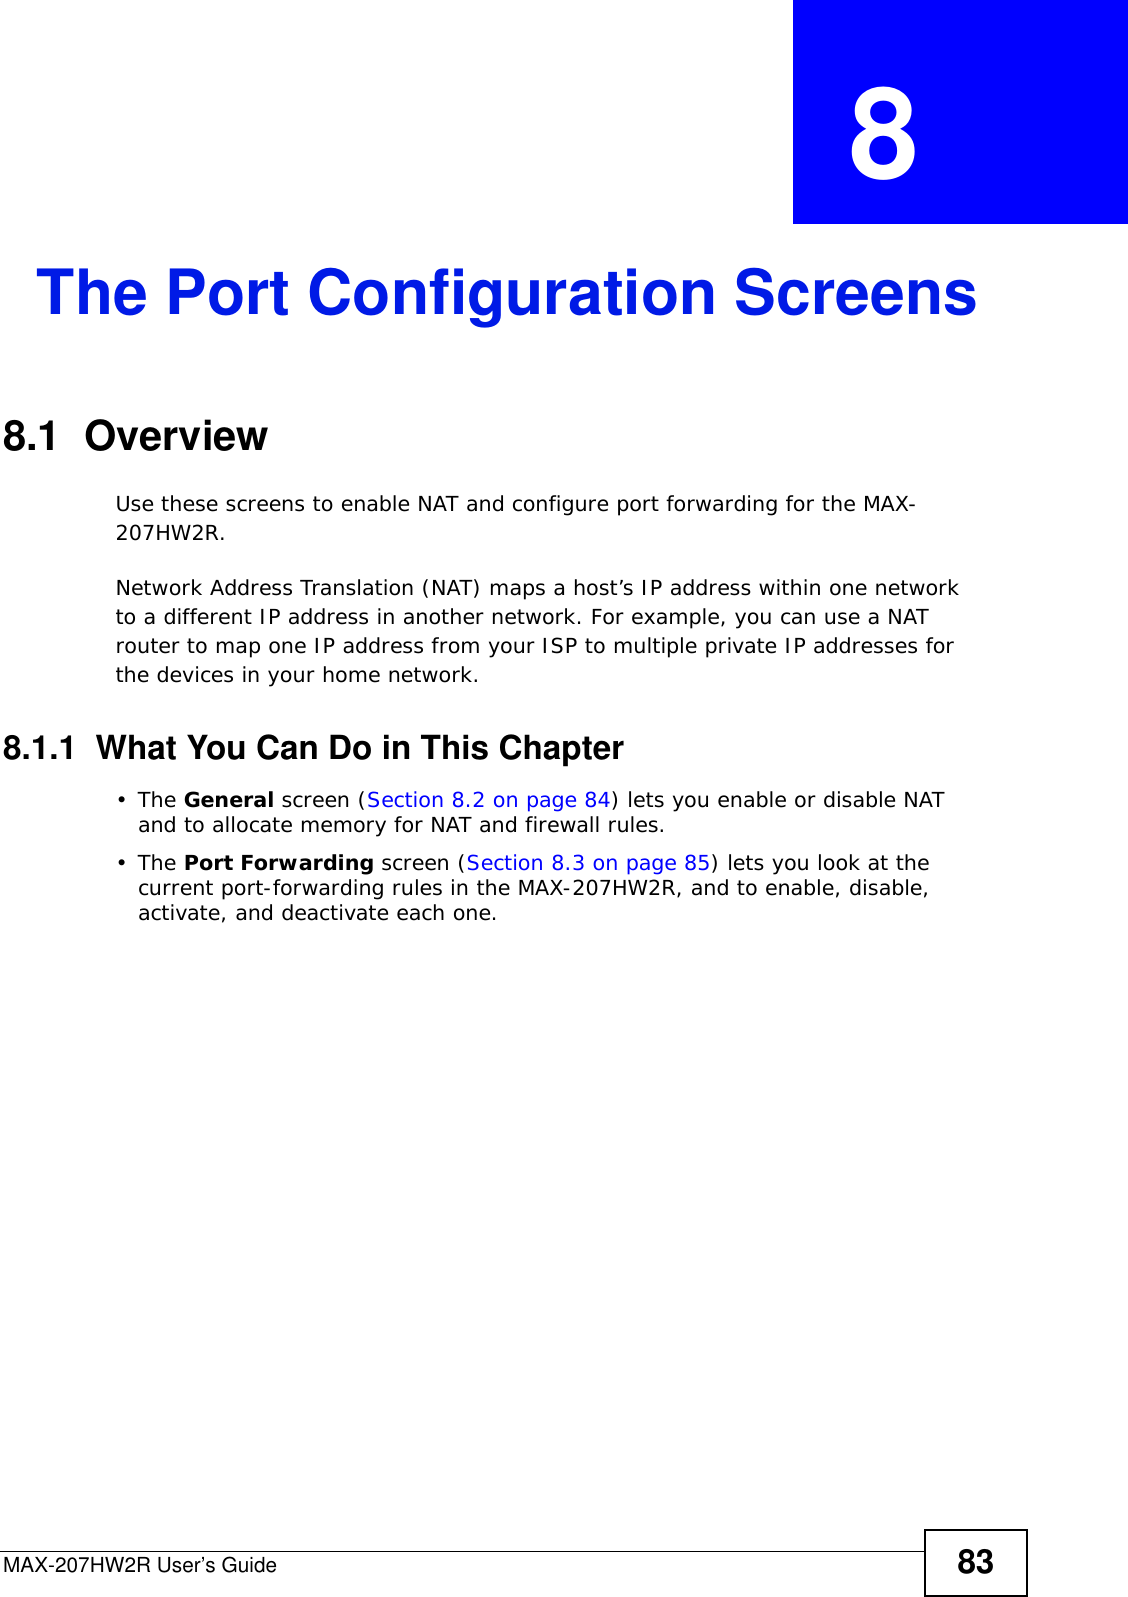 MAX-207HW2R User’s Guide 83CHAPTER  8 The Port Configuration Screens8.1  OverviewUse these screens to enable NAT and configure port forwarding for the MAX-207HW2R.Network Address Translation (NAT) maps a host’s IP address within one network to a different IP address in another network. For example, you can use a NAT router to map one IP address from your ISP to multiple private IP addresses for the devices in your home network.8.1.1  What You Can Do in This Chapter•The General screen (Section 8.2 on page 84) lets you enable or disable NAT and to allocate memory for NAT and firewall rules.•The Port Forwarding screen (Section 8.3 on page 85) lets you look at the current port-forwarding rules in the MAX-207HW2R, and to enable, disable, activate, and deactivate each one.